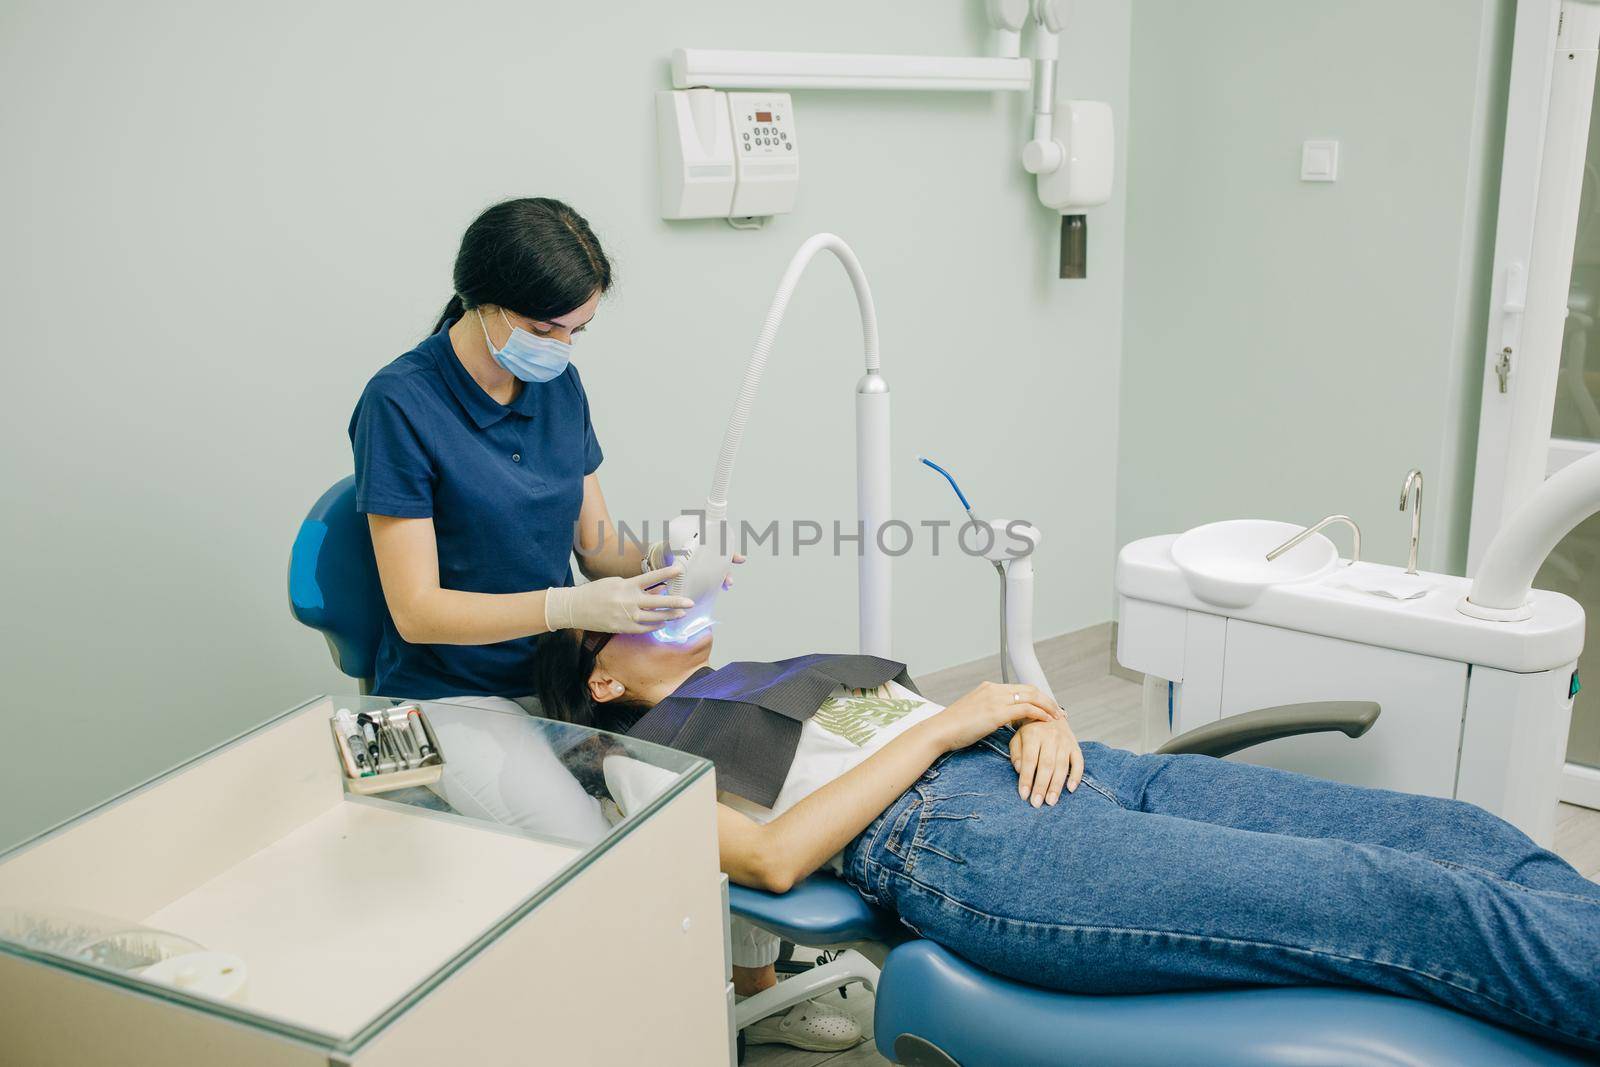 Dentist stomatologist whitening teeth for patient in medicine dental clinic with lamp. Concept of teeth care and dentistry. Teeth whitening procedure.